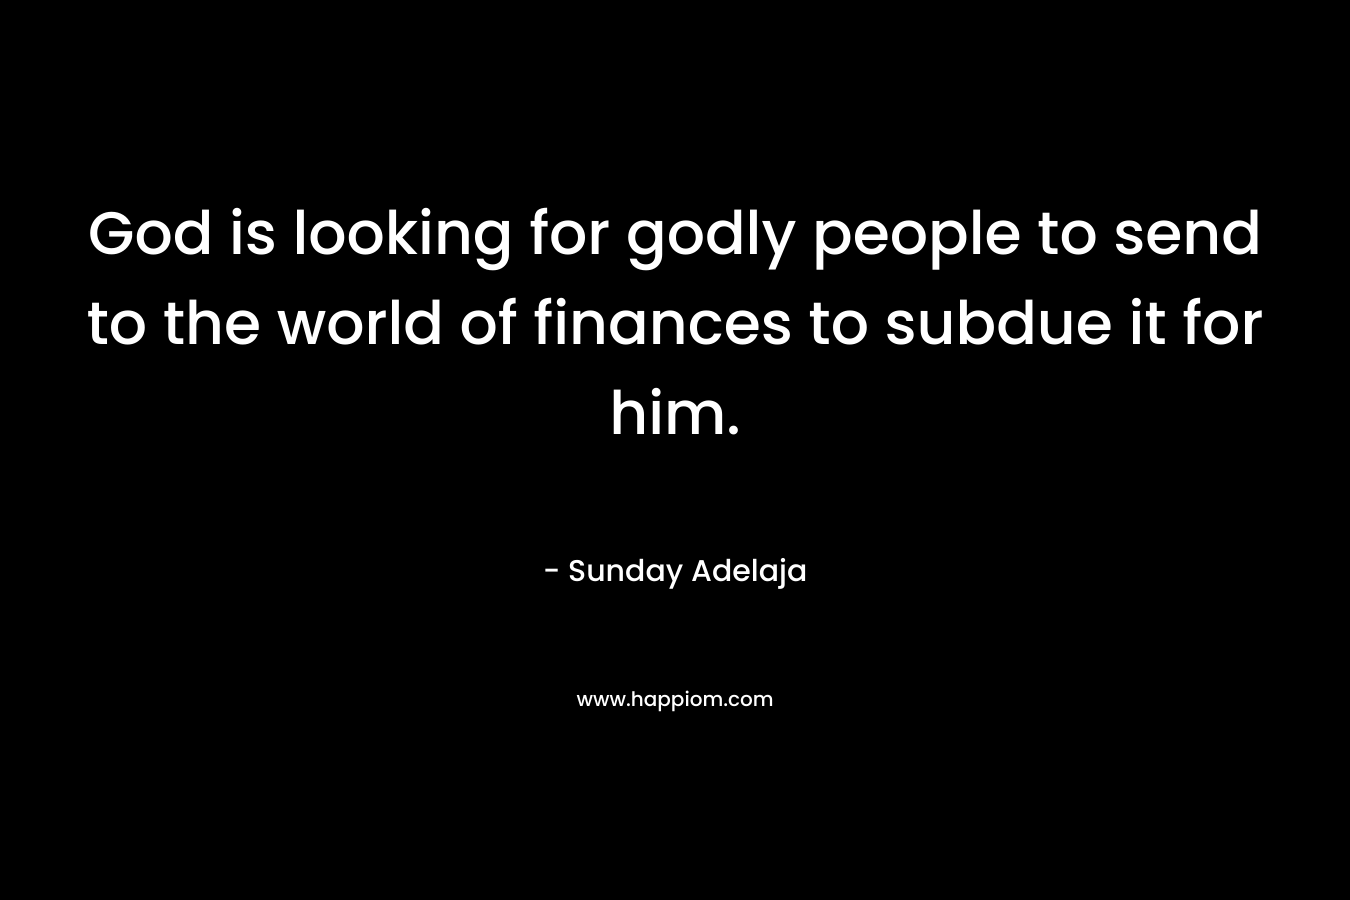 God is looking for godly people to send to the world of finances to subdue it for him. – Sunday Adelaja